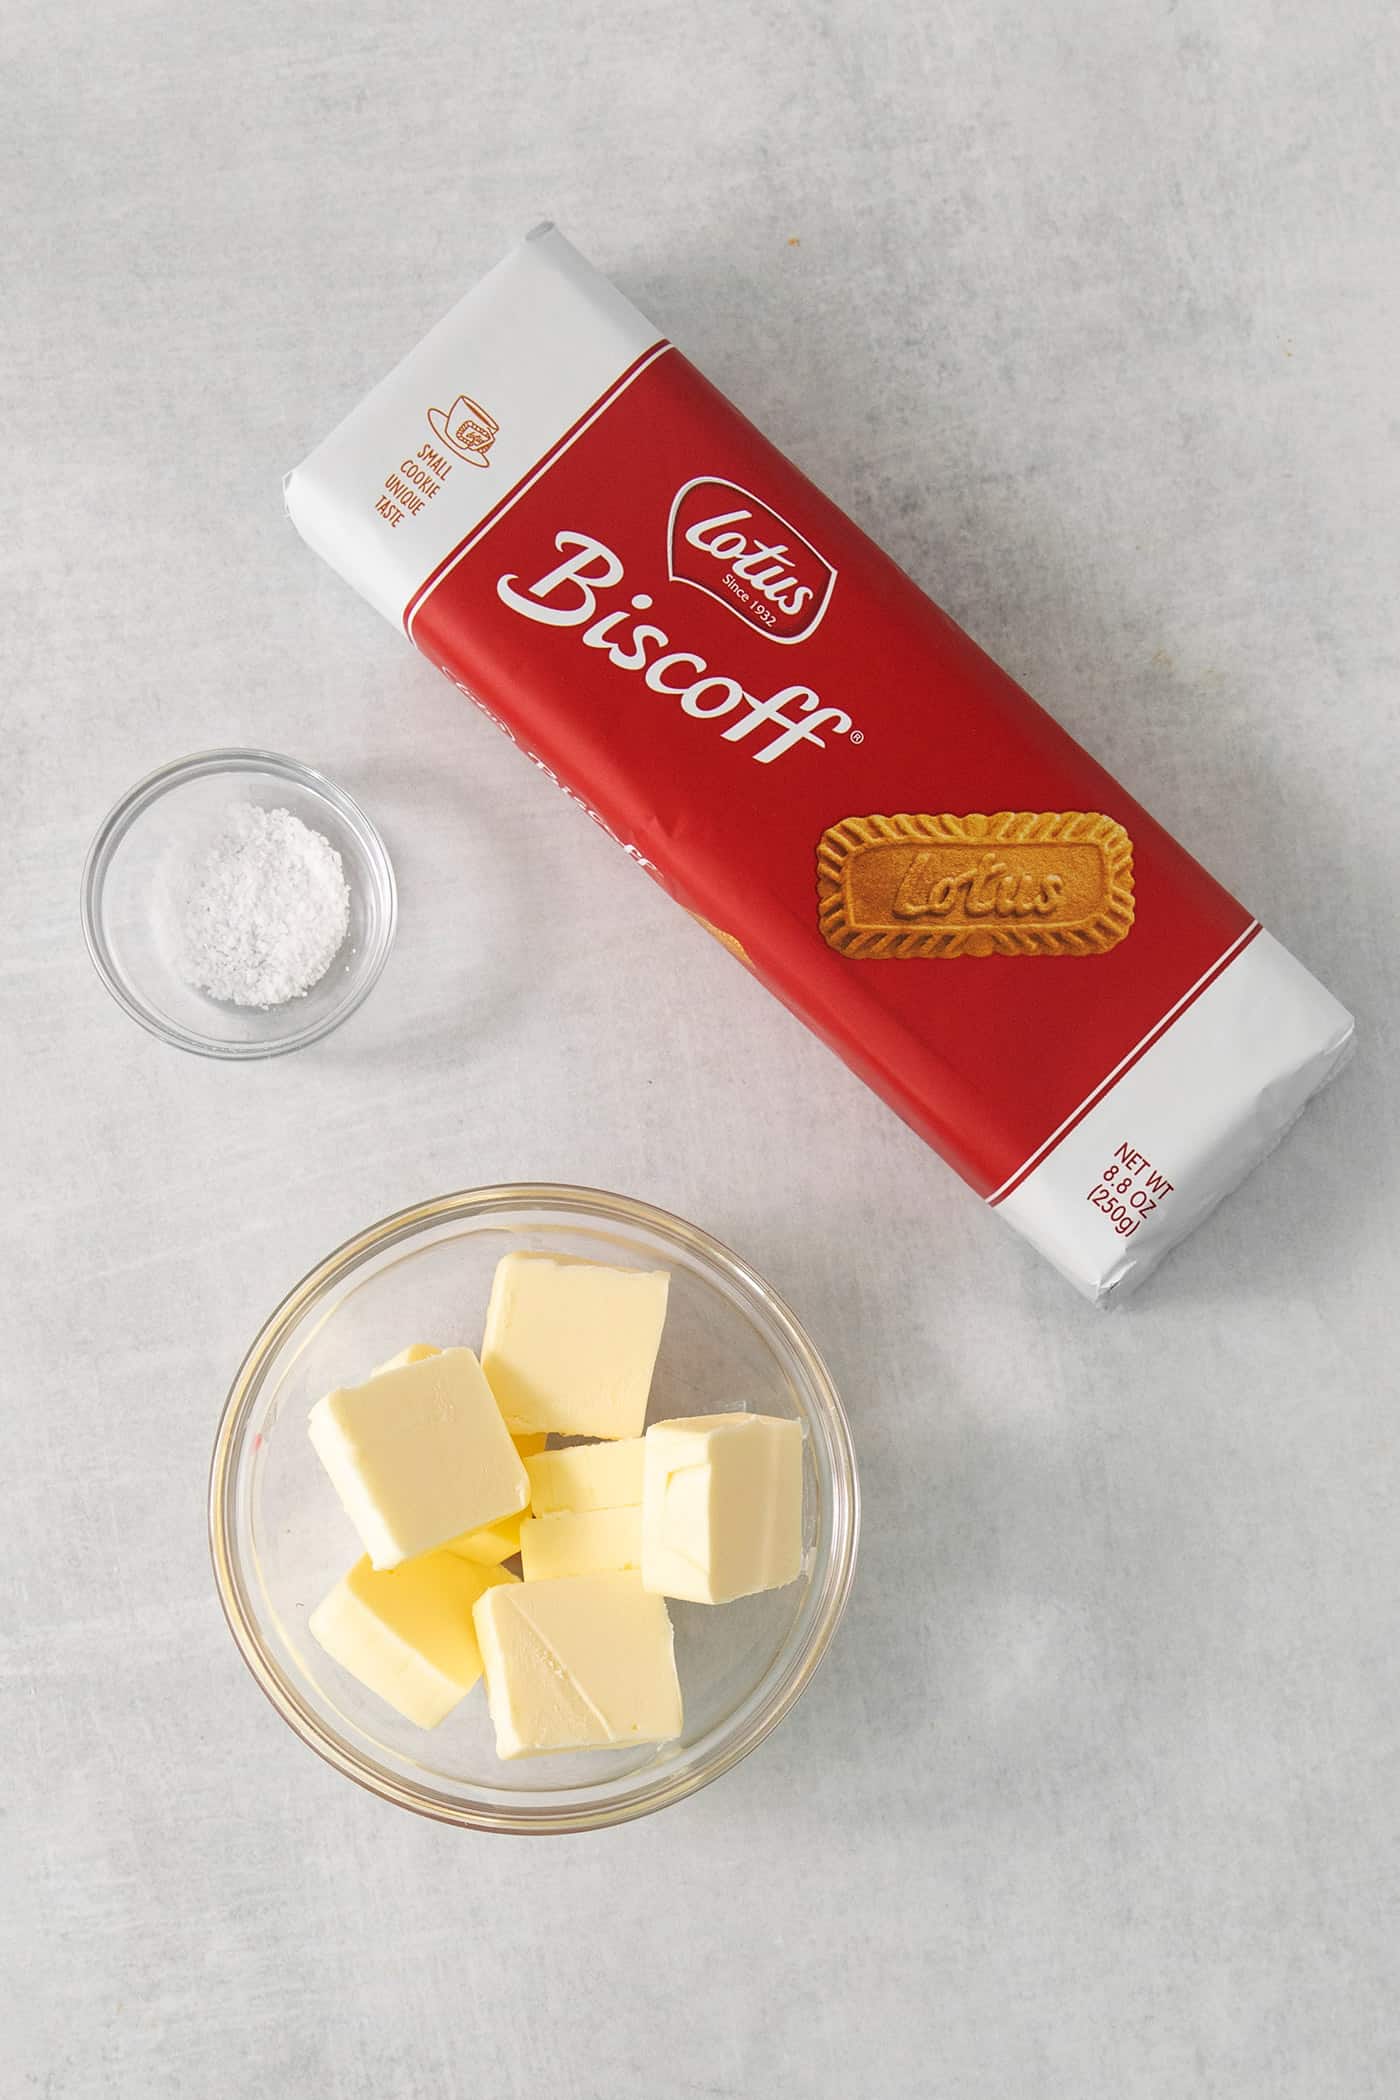 The ingredients needed to make biscoff cookie crust are shown: biscoff cookies, butter, and salt.